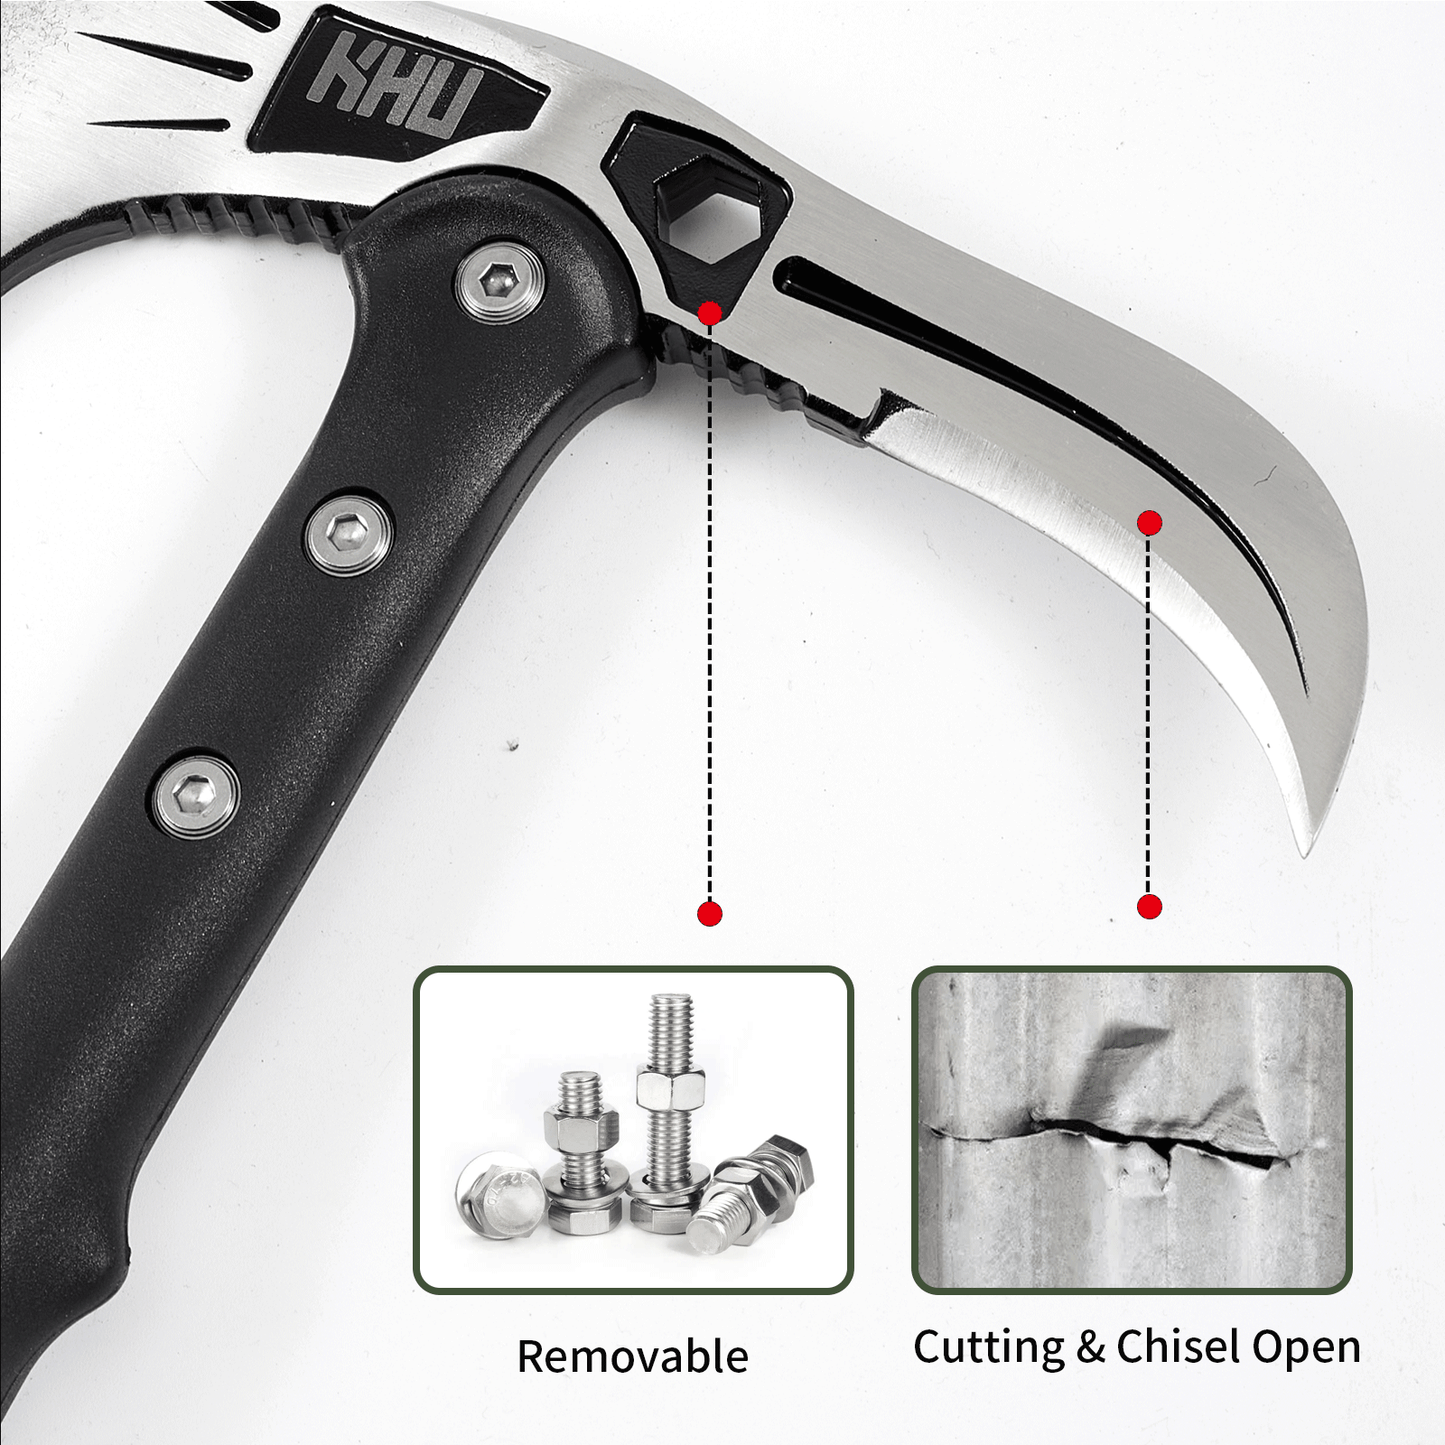 KHU Camping Axe Tactical Throwing Axe Tomahawk Survival Hatchet Axe with Sheath - Nylon Fiber Handle for Outdoor Hunting Hiking Camping Gear